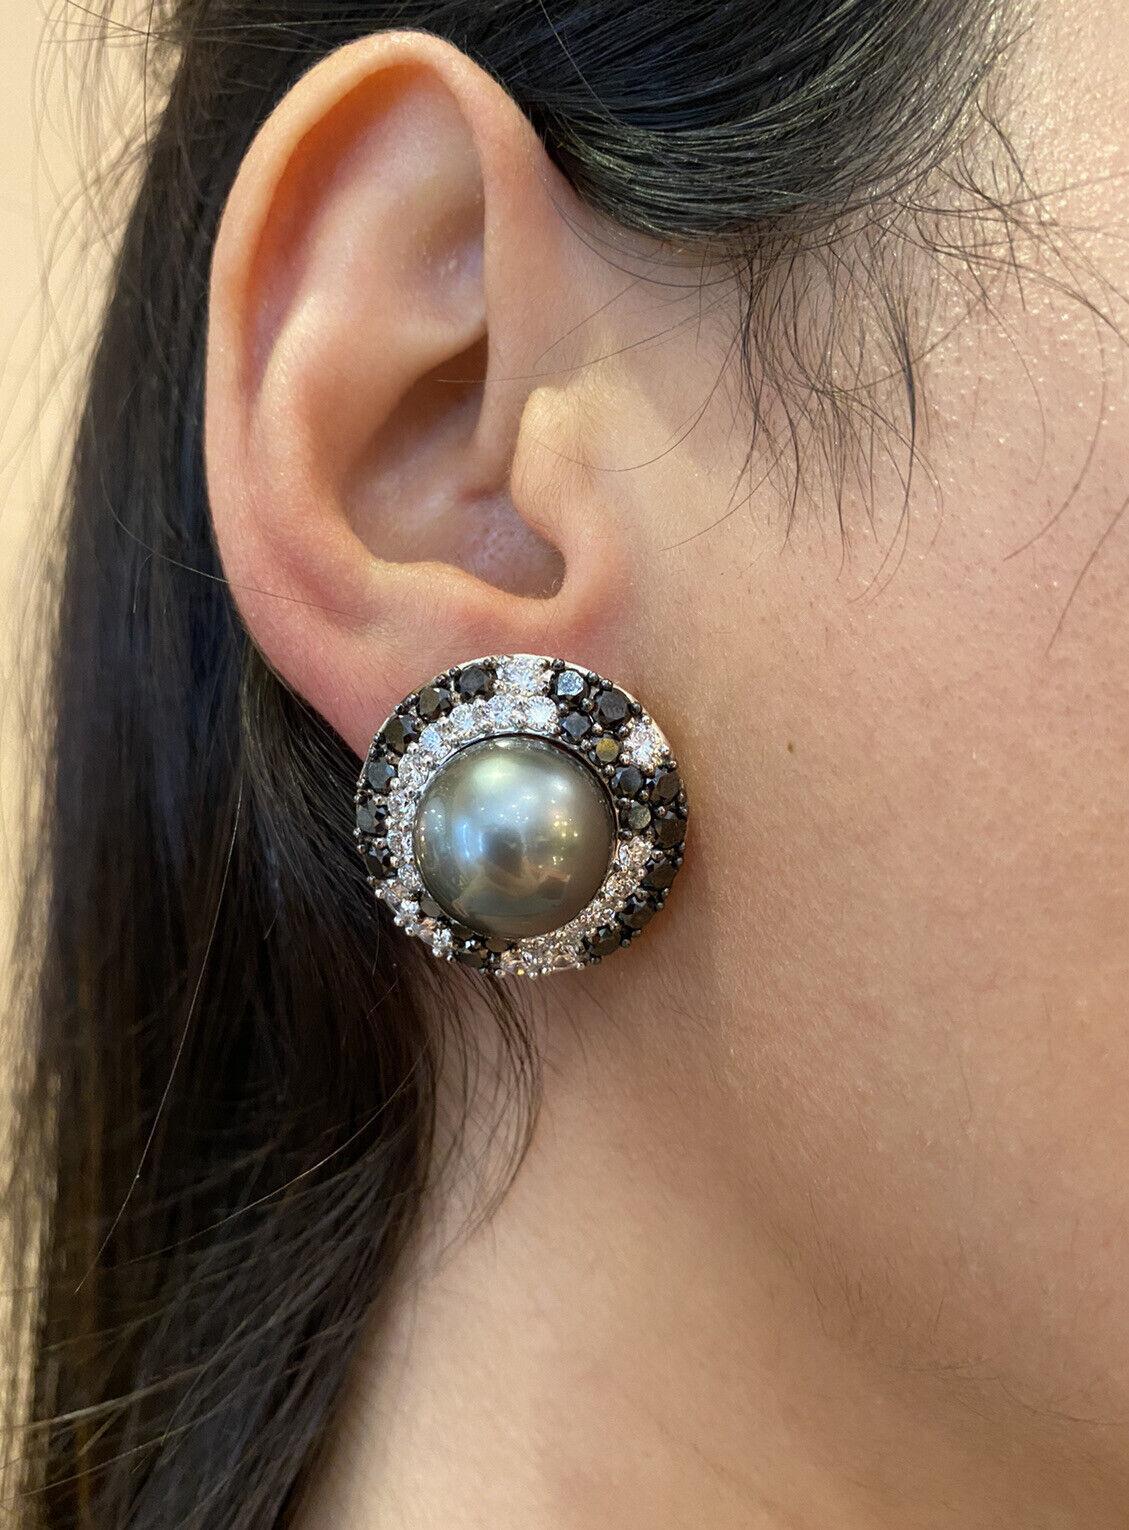 Tahitian Black Pearl Earrings with Black & White Diamonds in 18k White Gold

Large Diamond and Pearl Earrings features a Tahitian Black Pearl in the center, approximately 14mm in size, surrounded by White and Black Round Diamonds set in 18k White